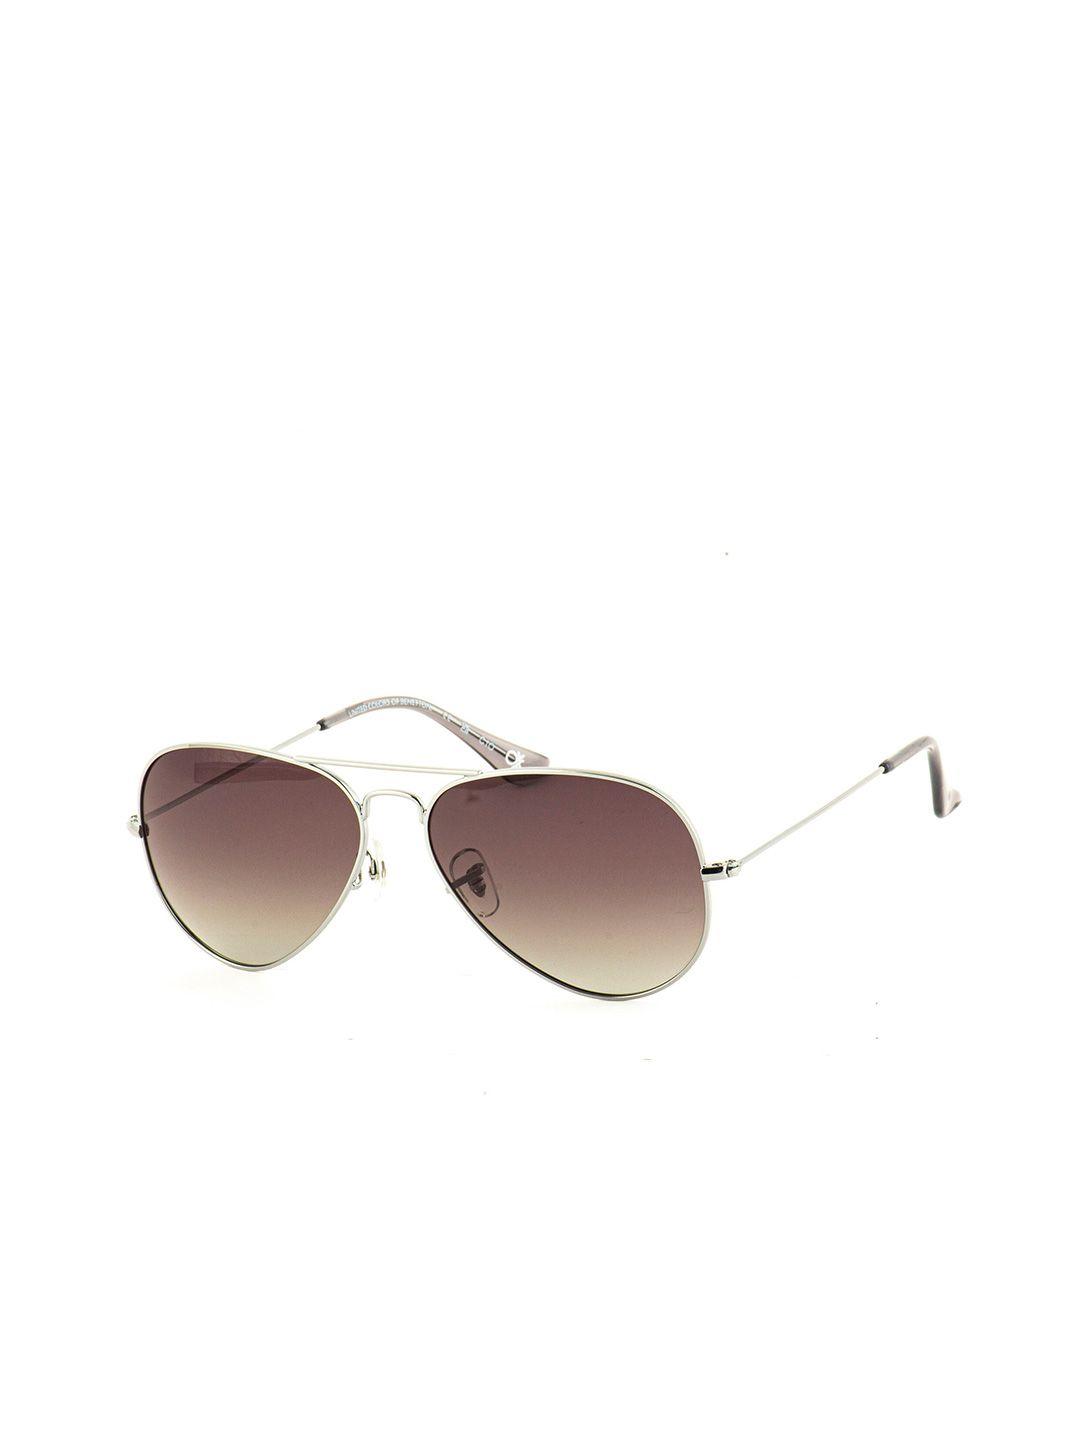 united-colors-of-benetton-men-aviator-sunglasses-with-uv-protected-lens-bes23515-c5